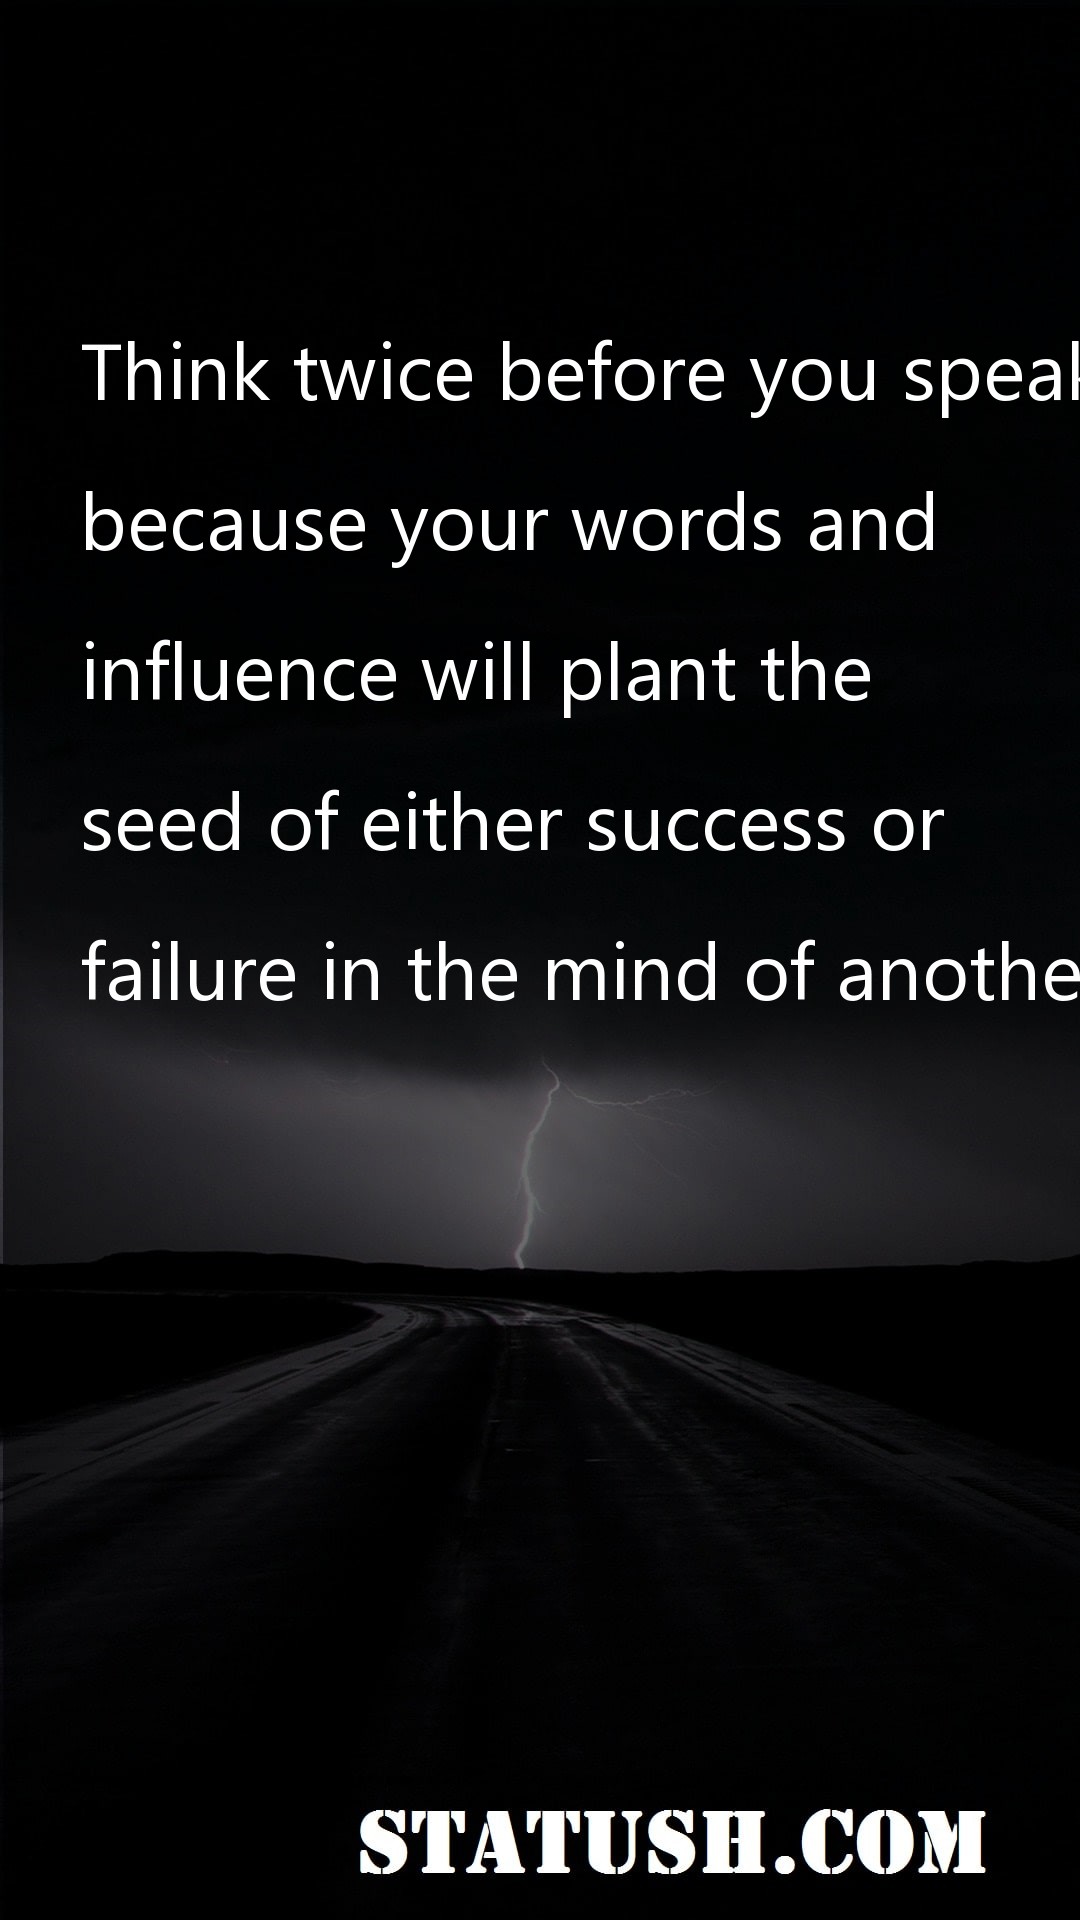 Think twice before you speak - Success Quotes at statush.com